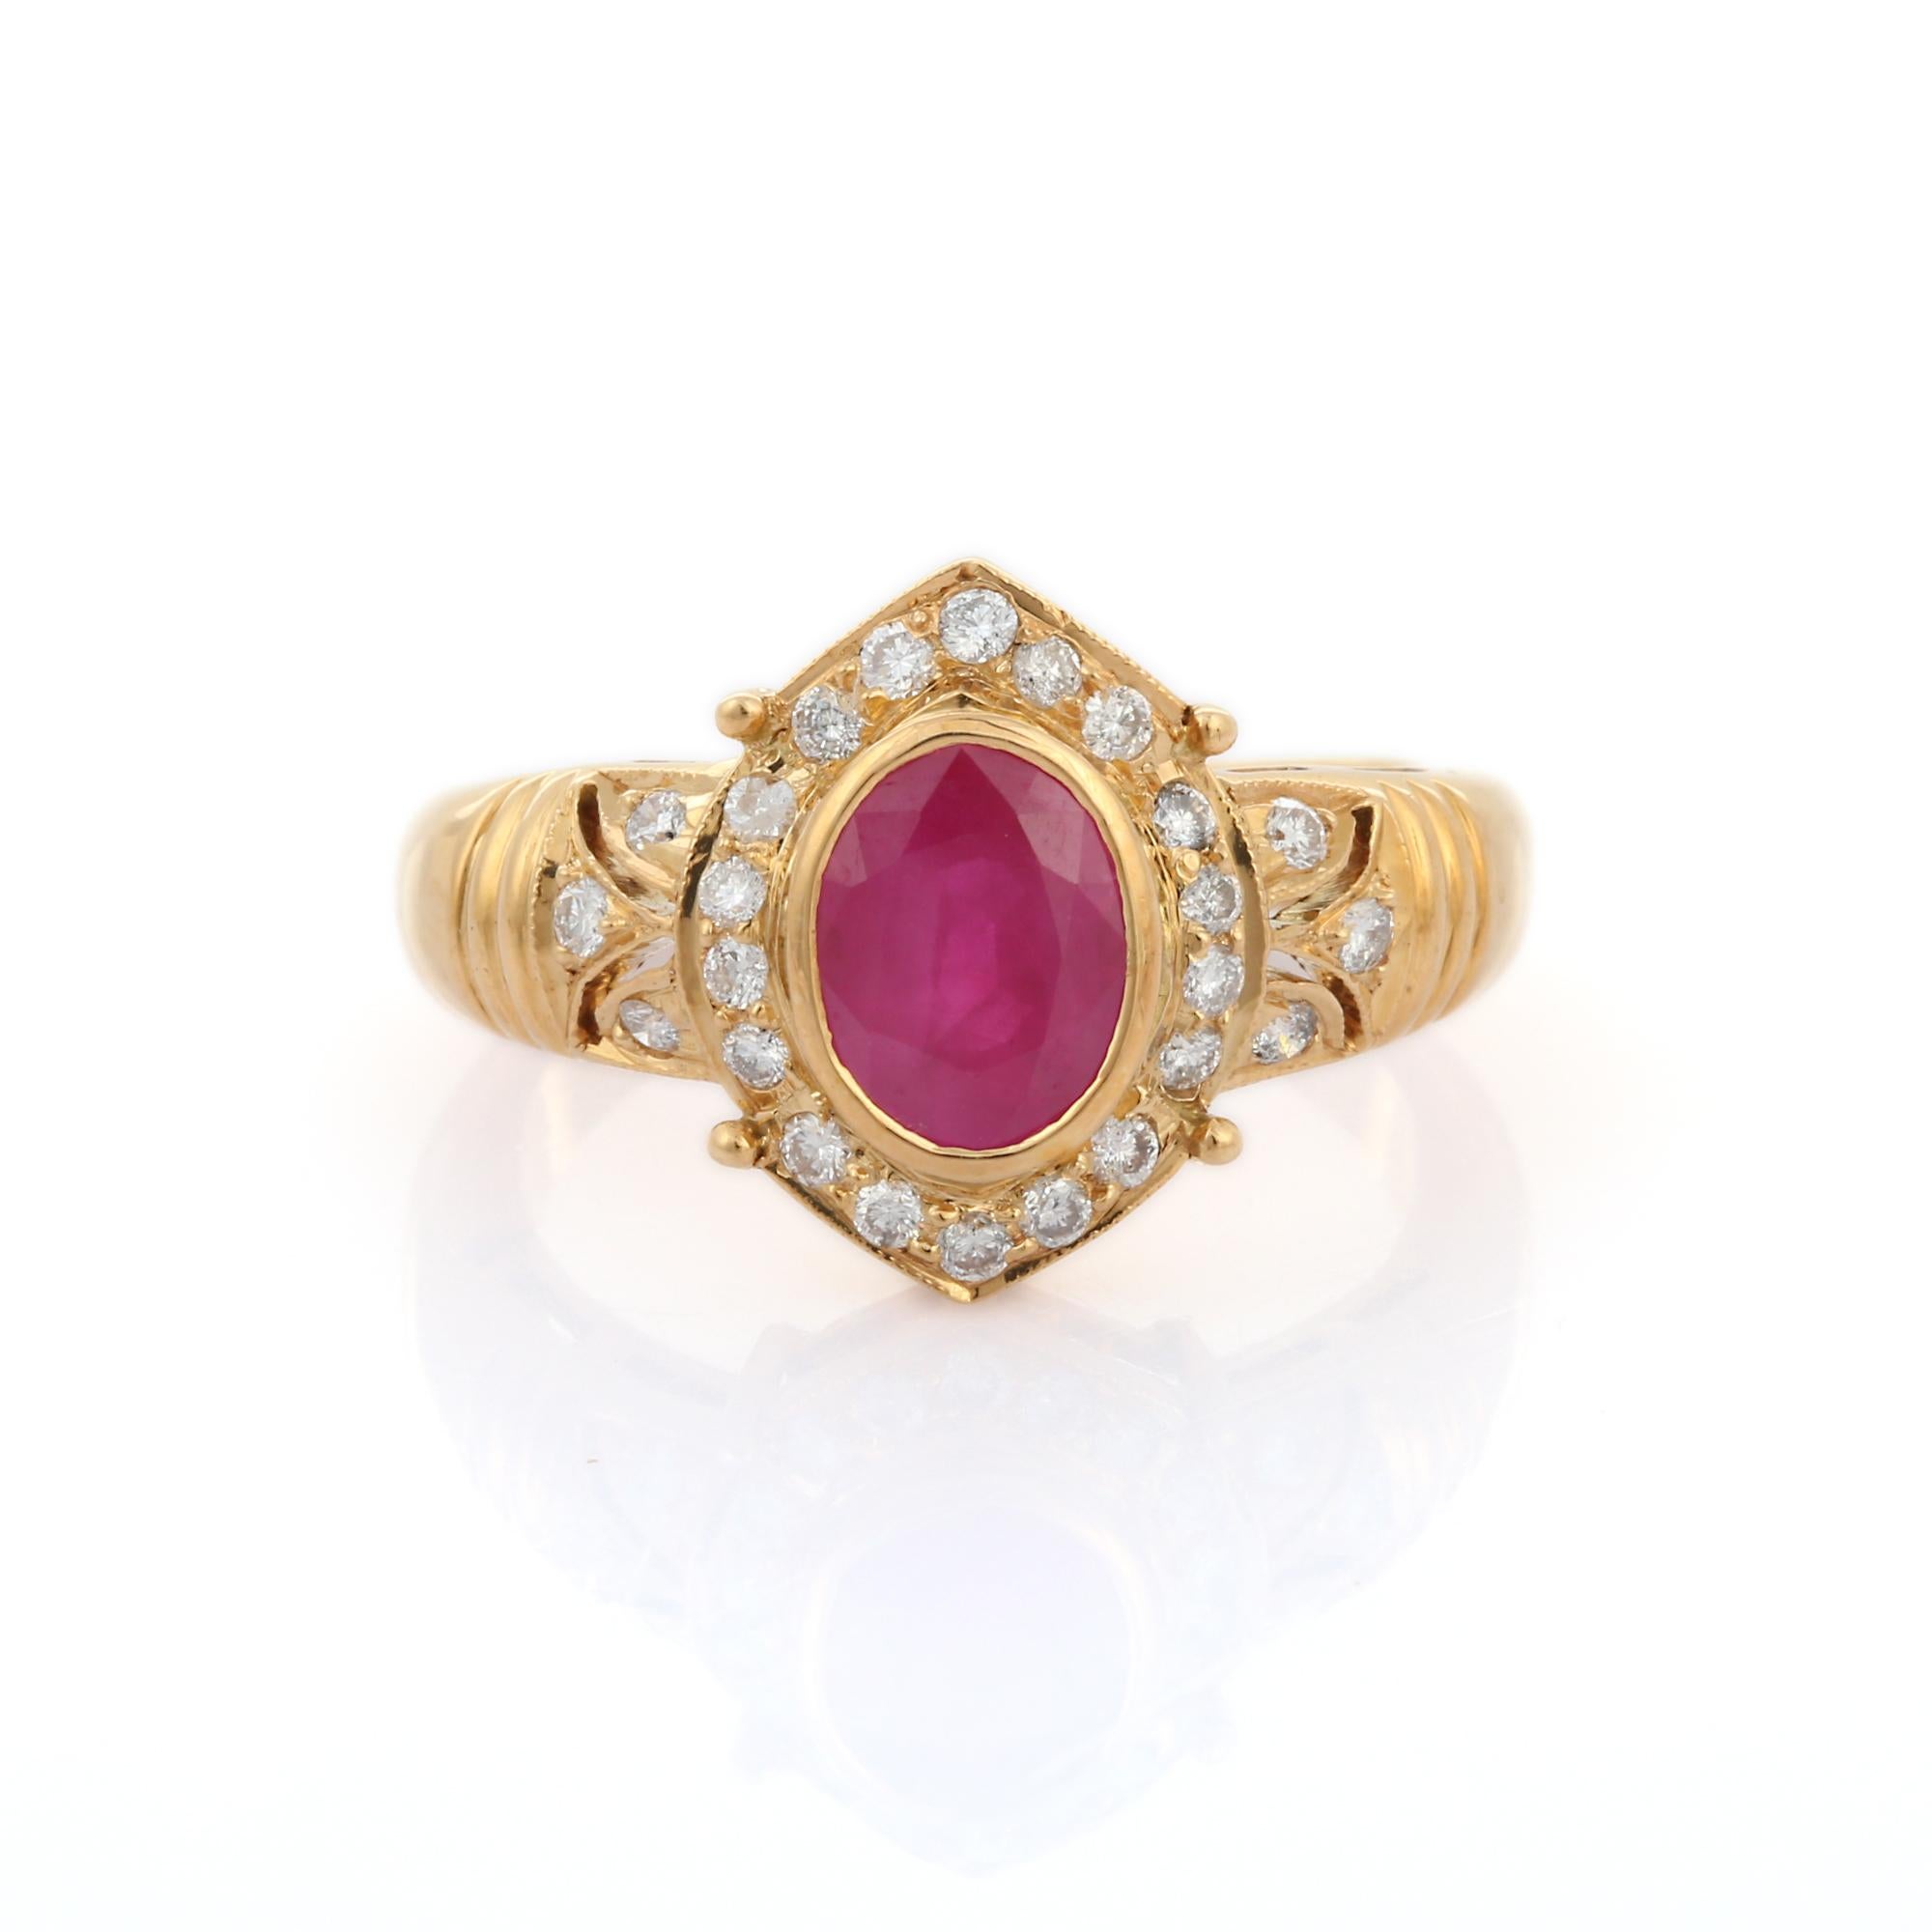 For Sale:  Contemporary Style Diamond Ruby Ring in 18K Yellow Gold 6